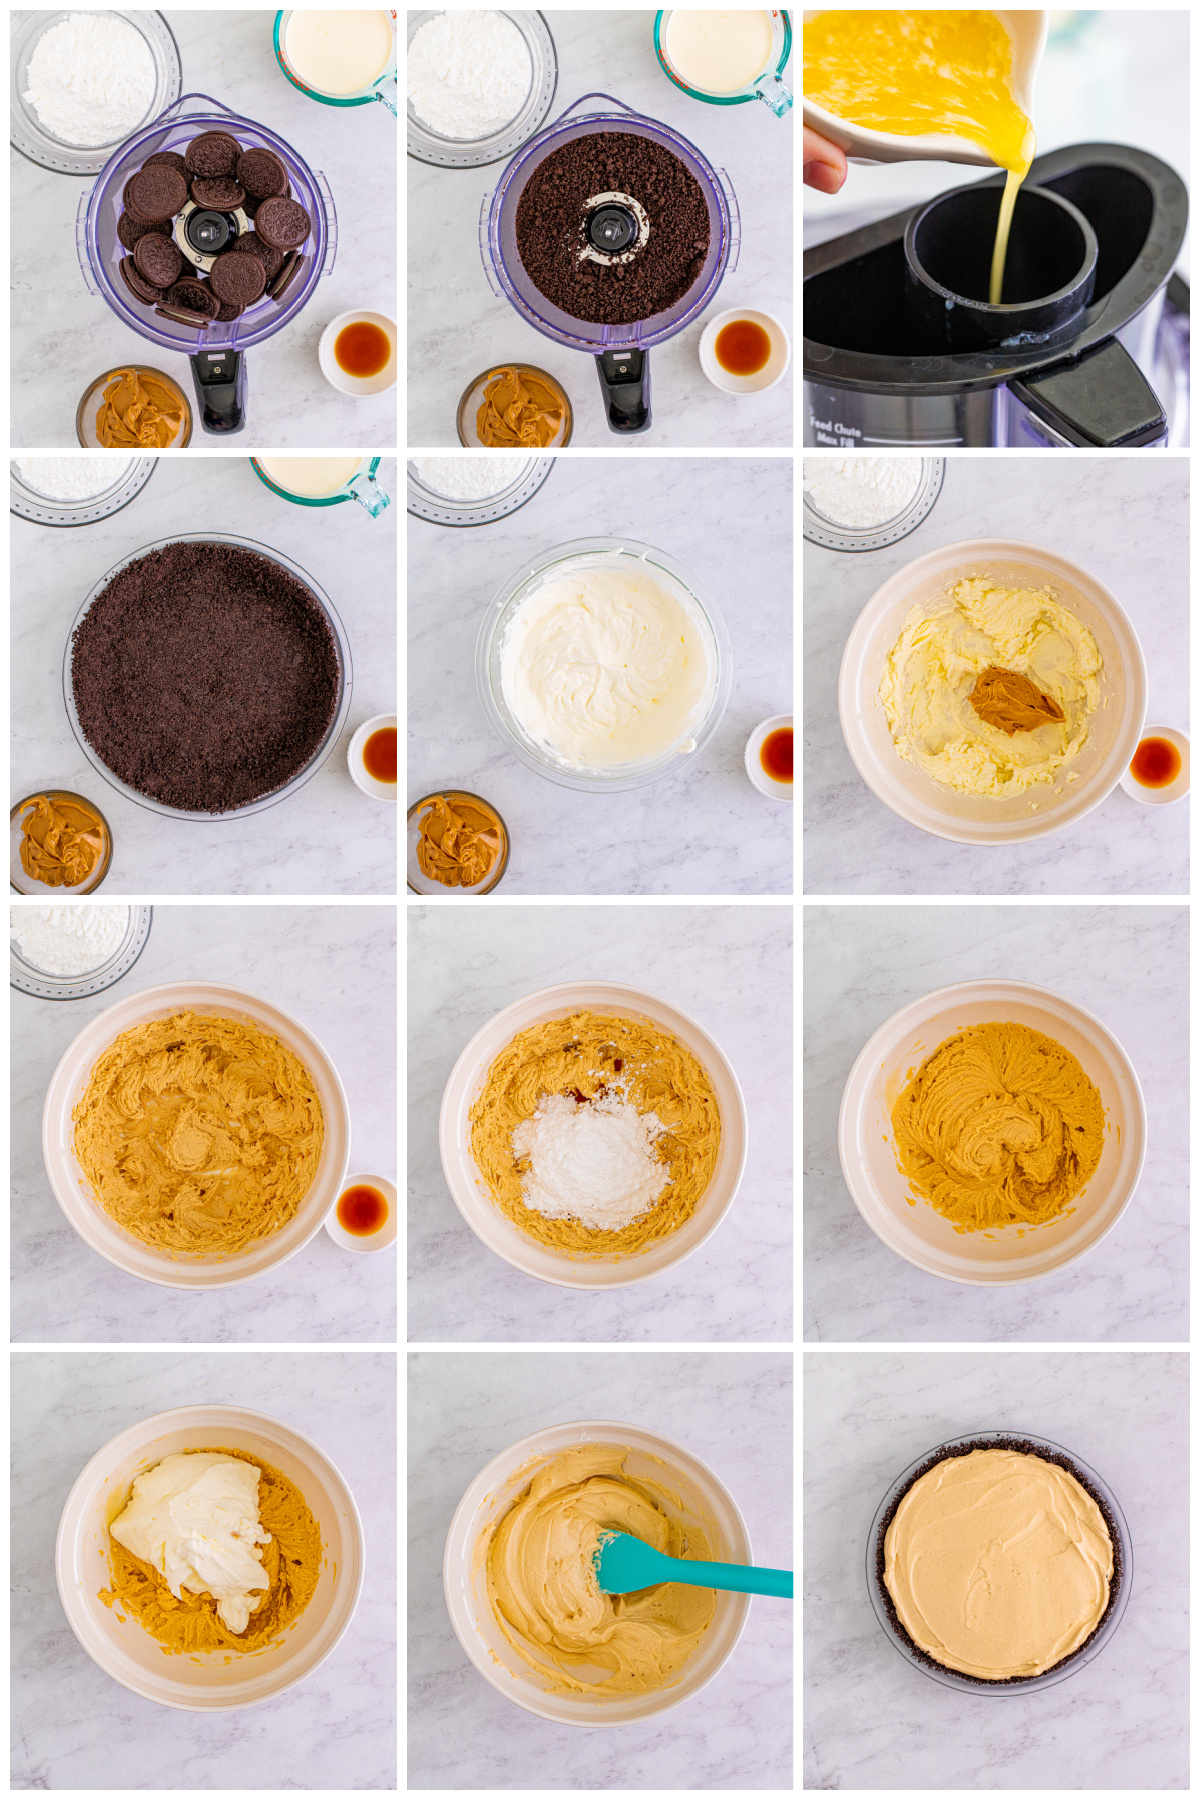 Step by step photos on how to make a No Bake Peanut Butter Pie.